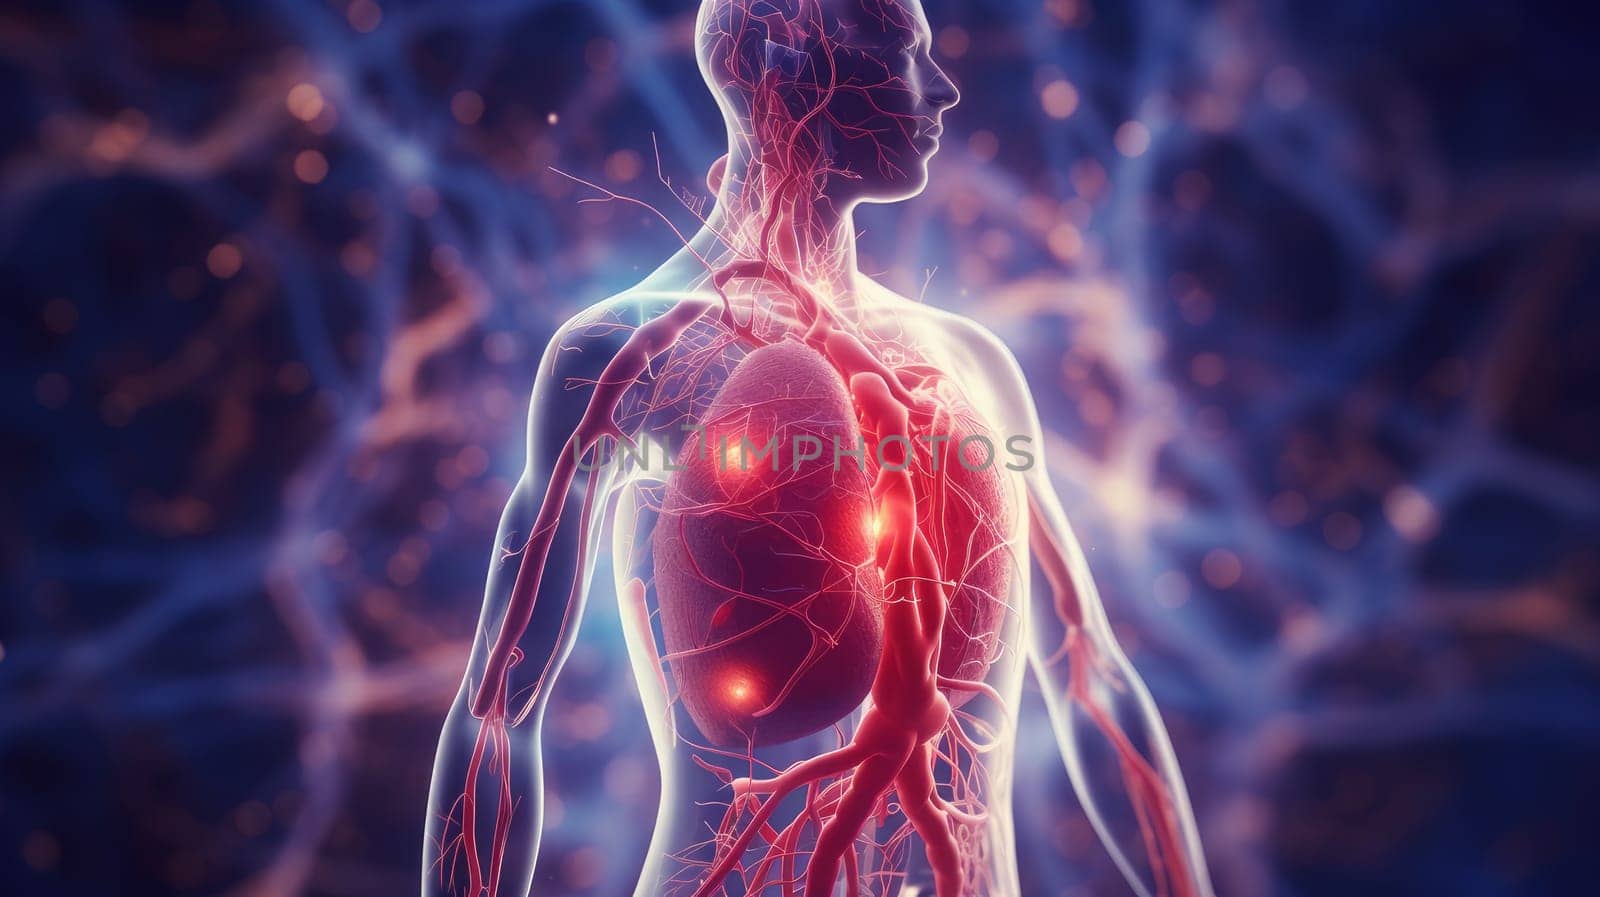 Human circulatory system, showing the nervous system and blood vessels. 3D modeling in the field of internal organ transplantation. Technologies in medicine and scientific research of the body, the study of human internal organs